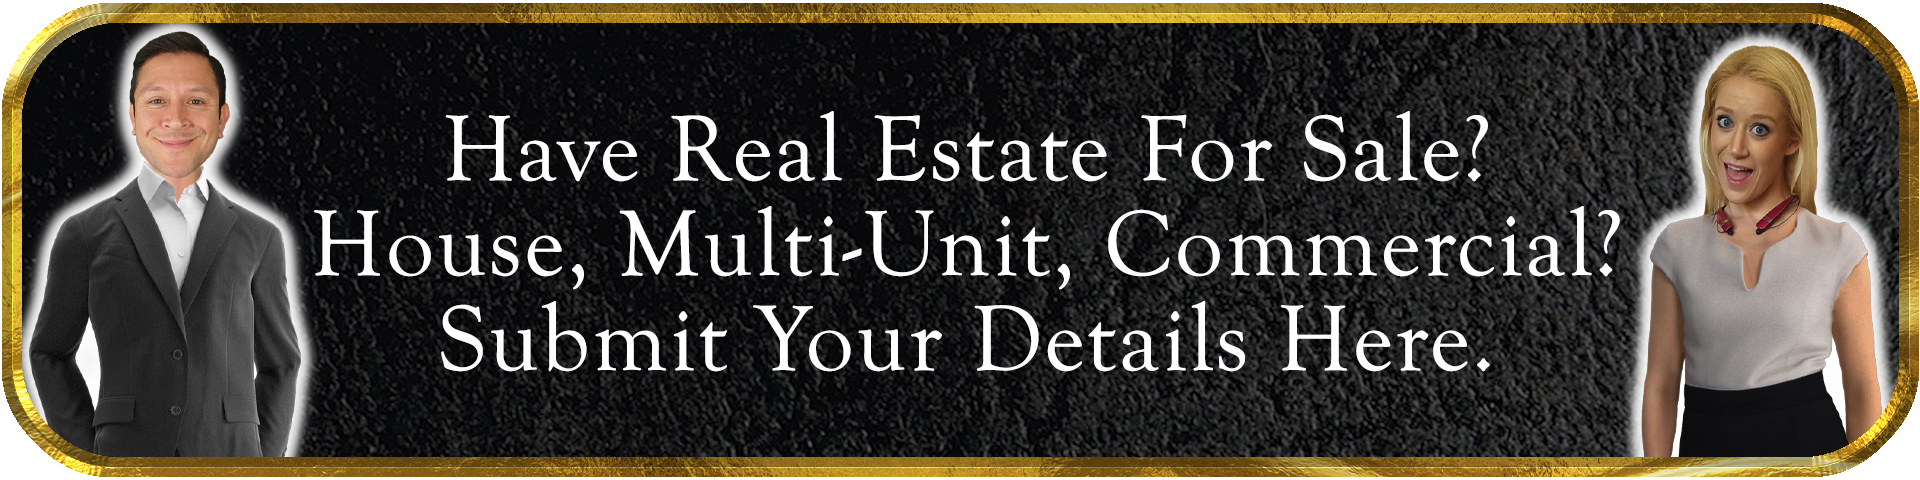 submit-your-real-estate-property-details-here